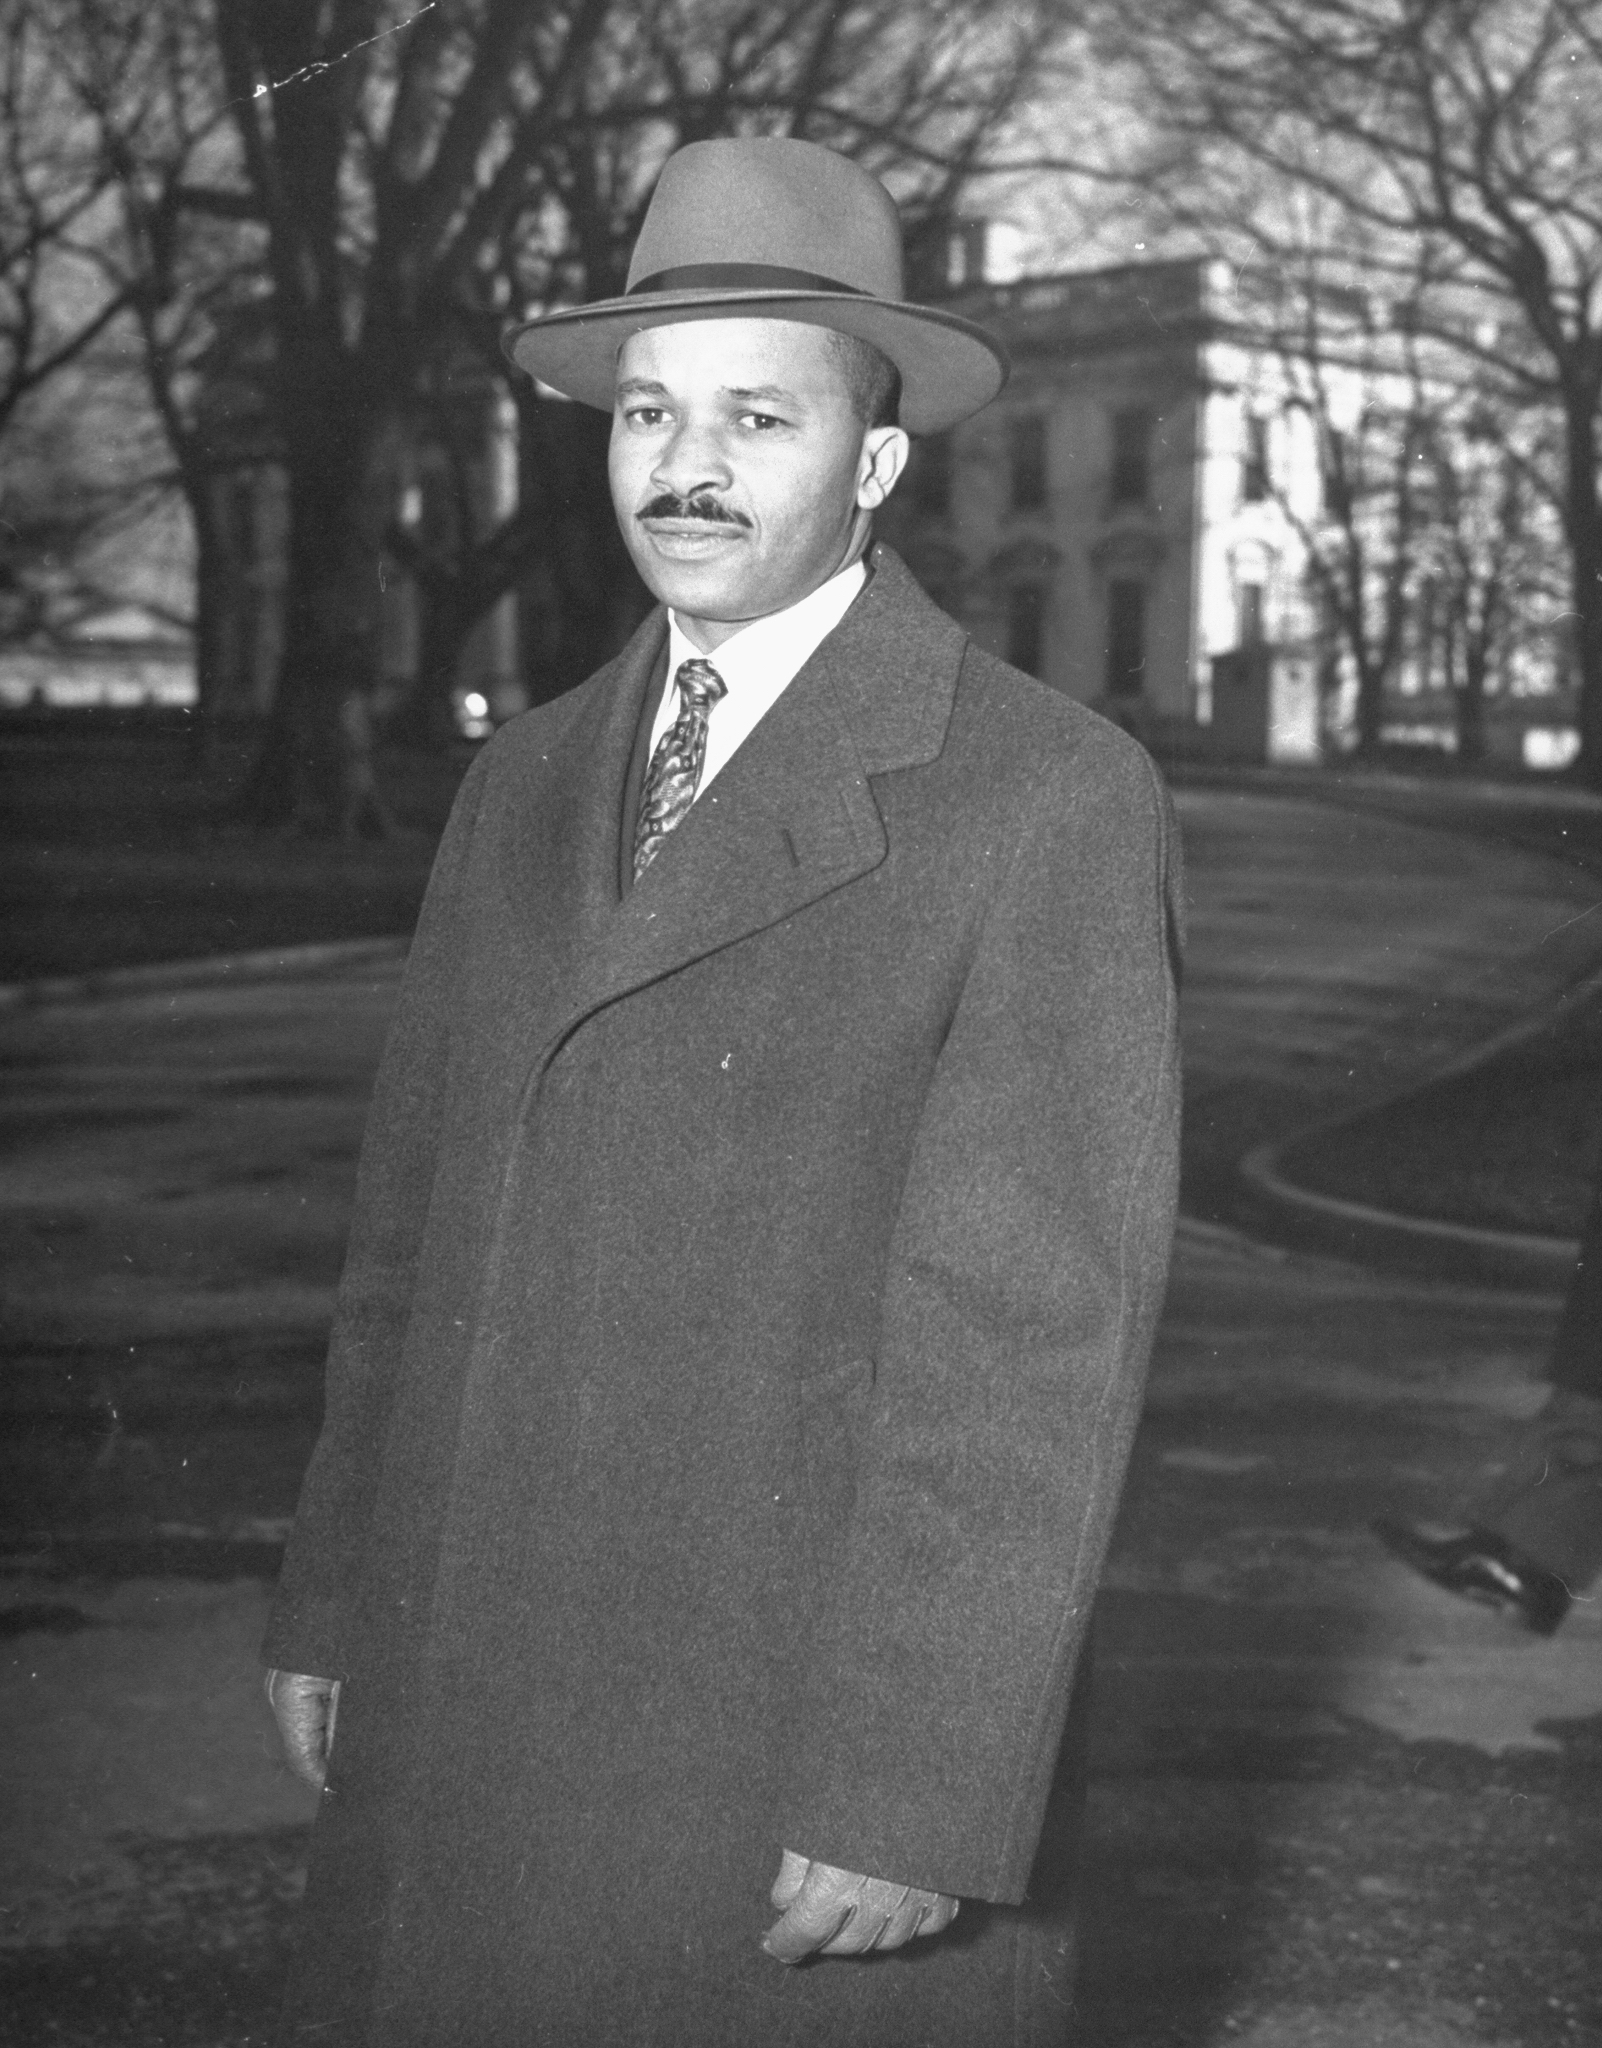 Reporter Harry McAlpin leaving the White House after a press conference in 1944. (George Skadding&mdash;Time &amp; Life Pictures/Getty Image)